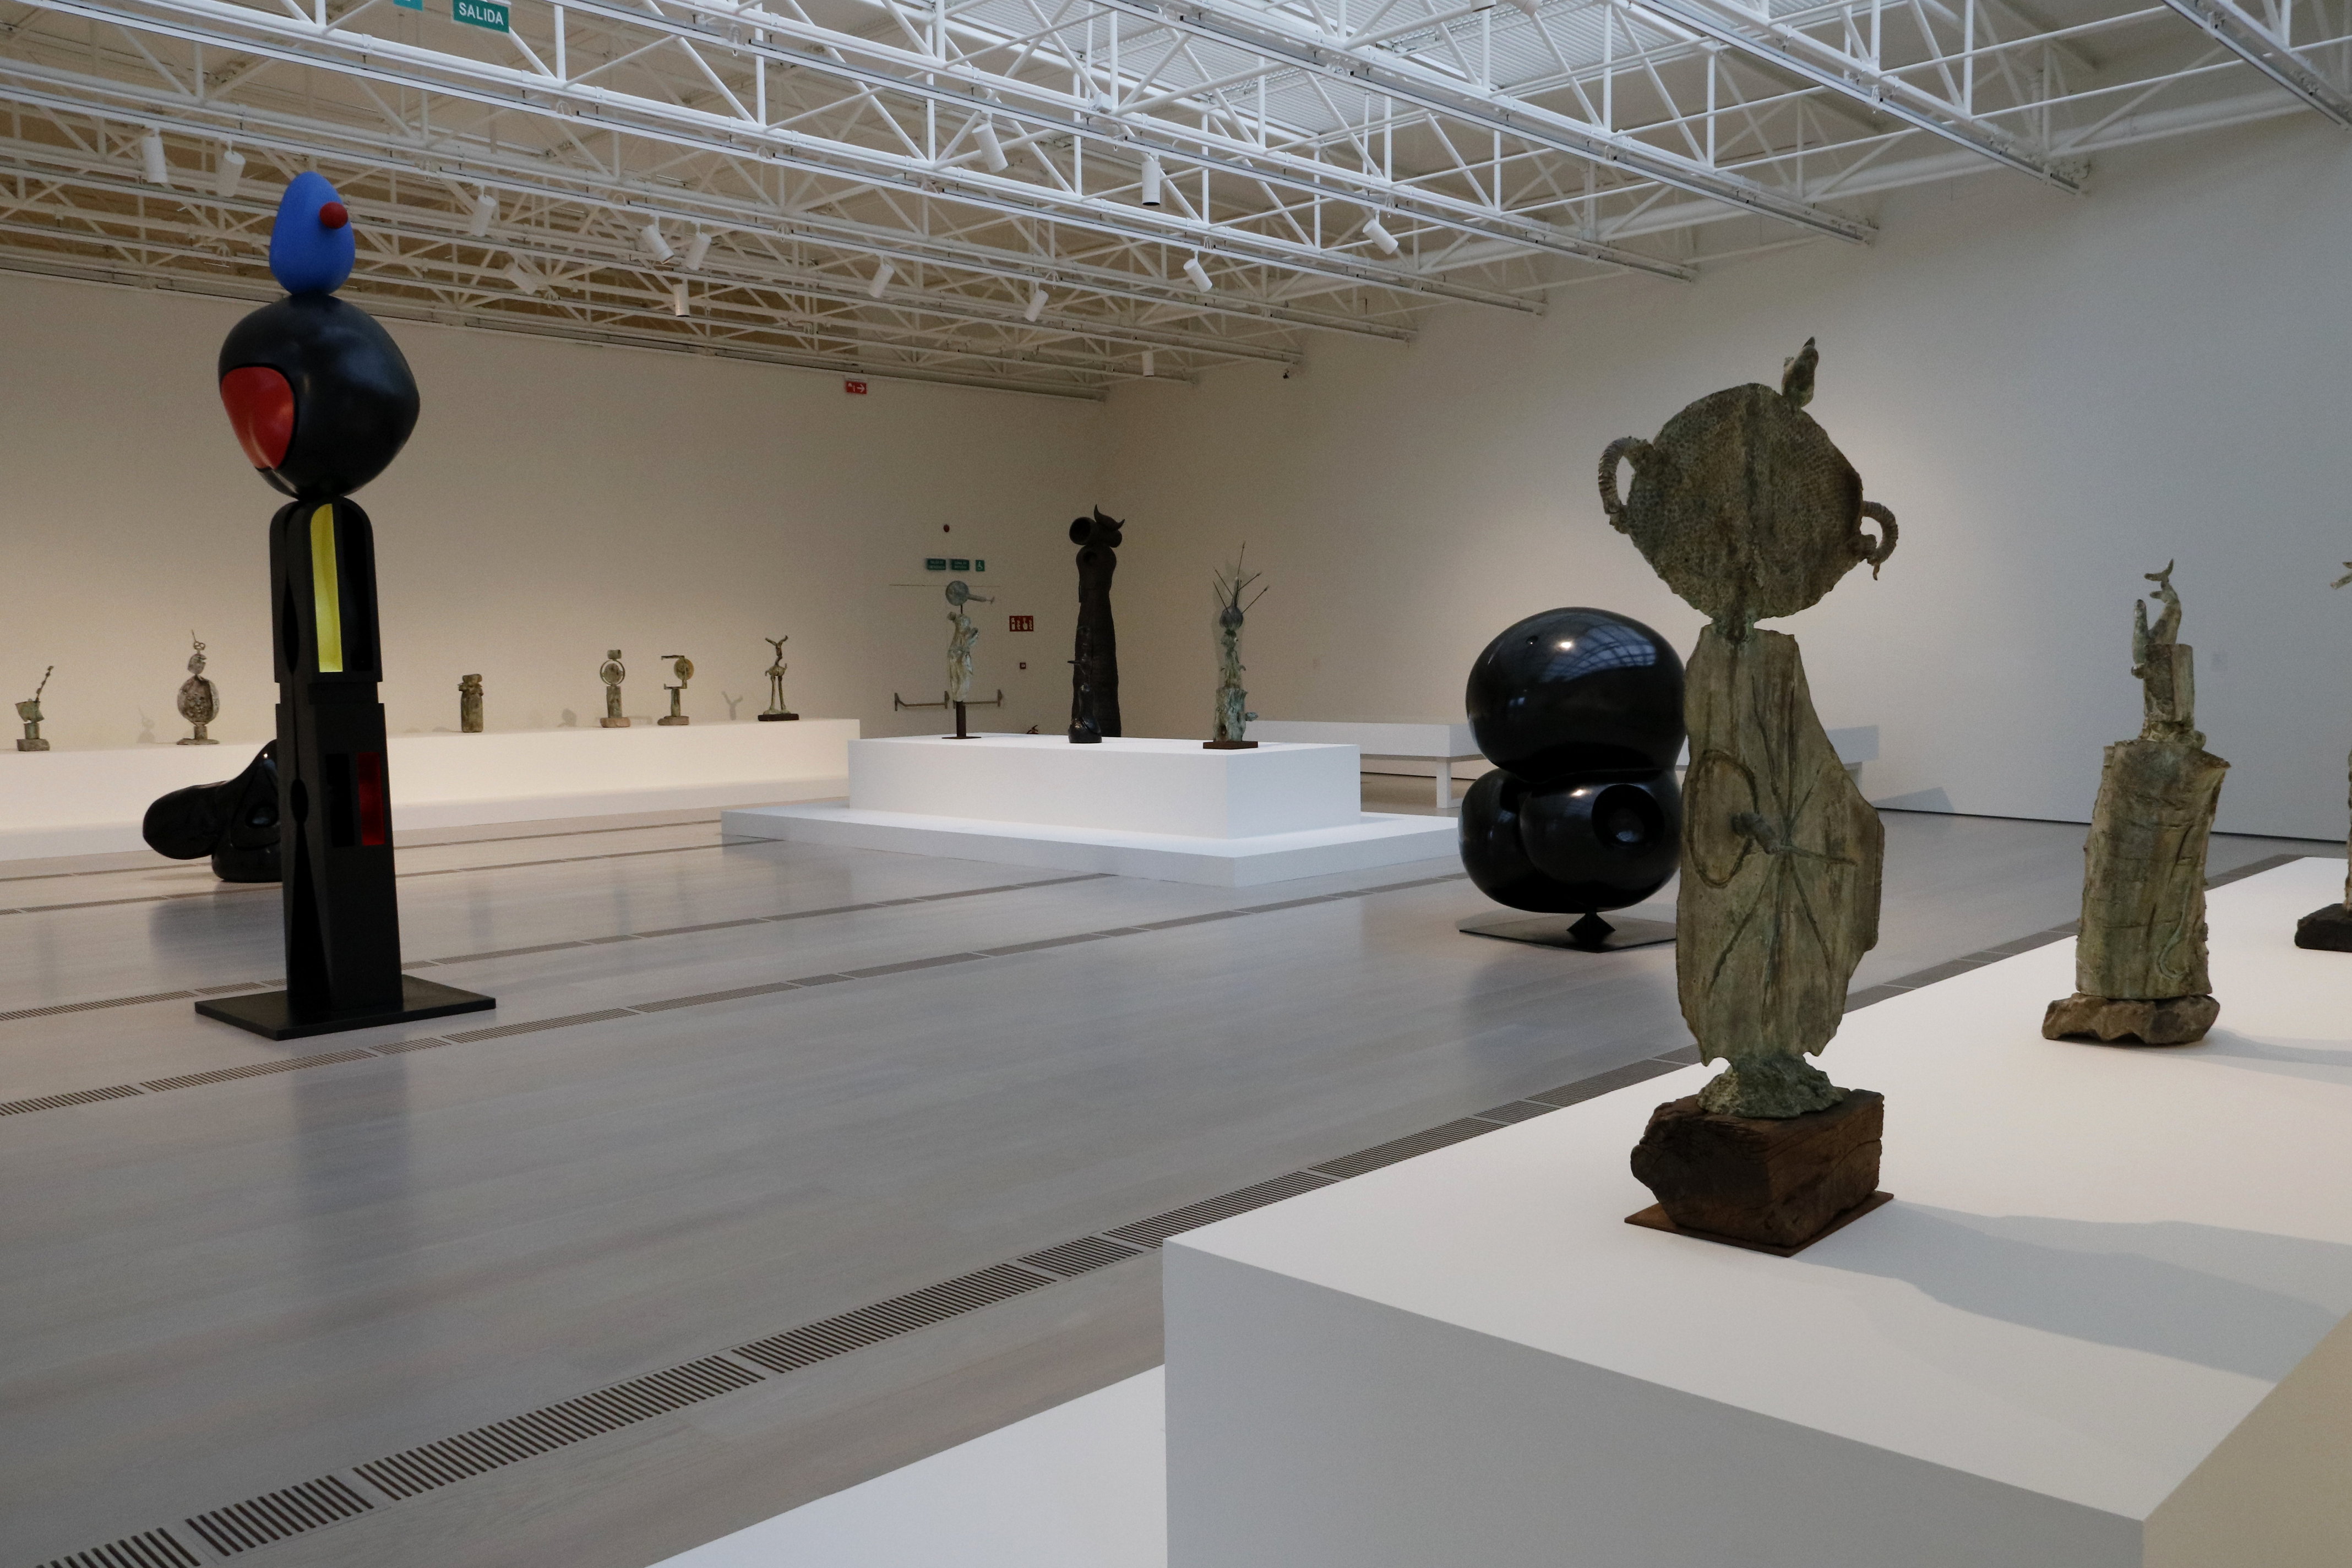 A photo of the exhibit ‘Joan Miró: Sculptures 1928-1982’ in Santander, on March 19 2018 (by Guillem Roset)